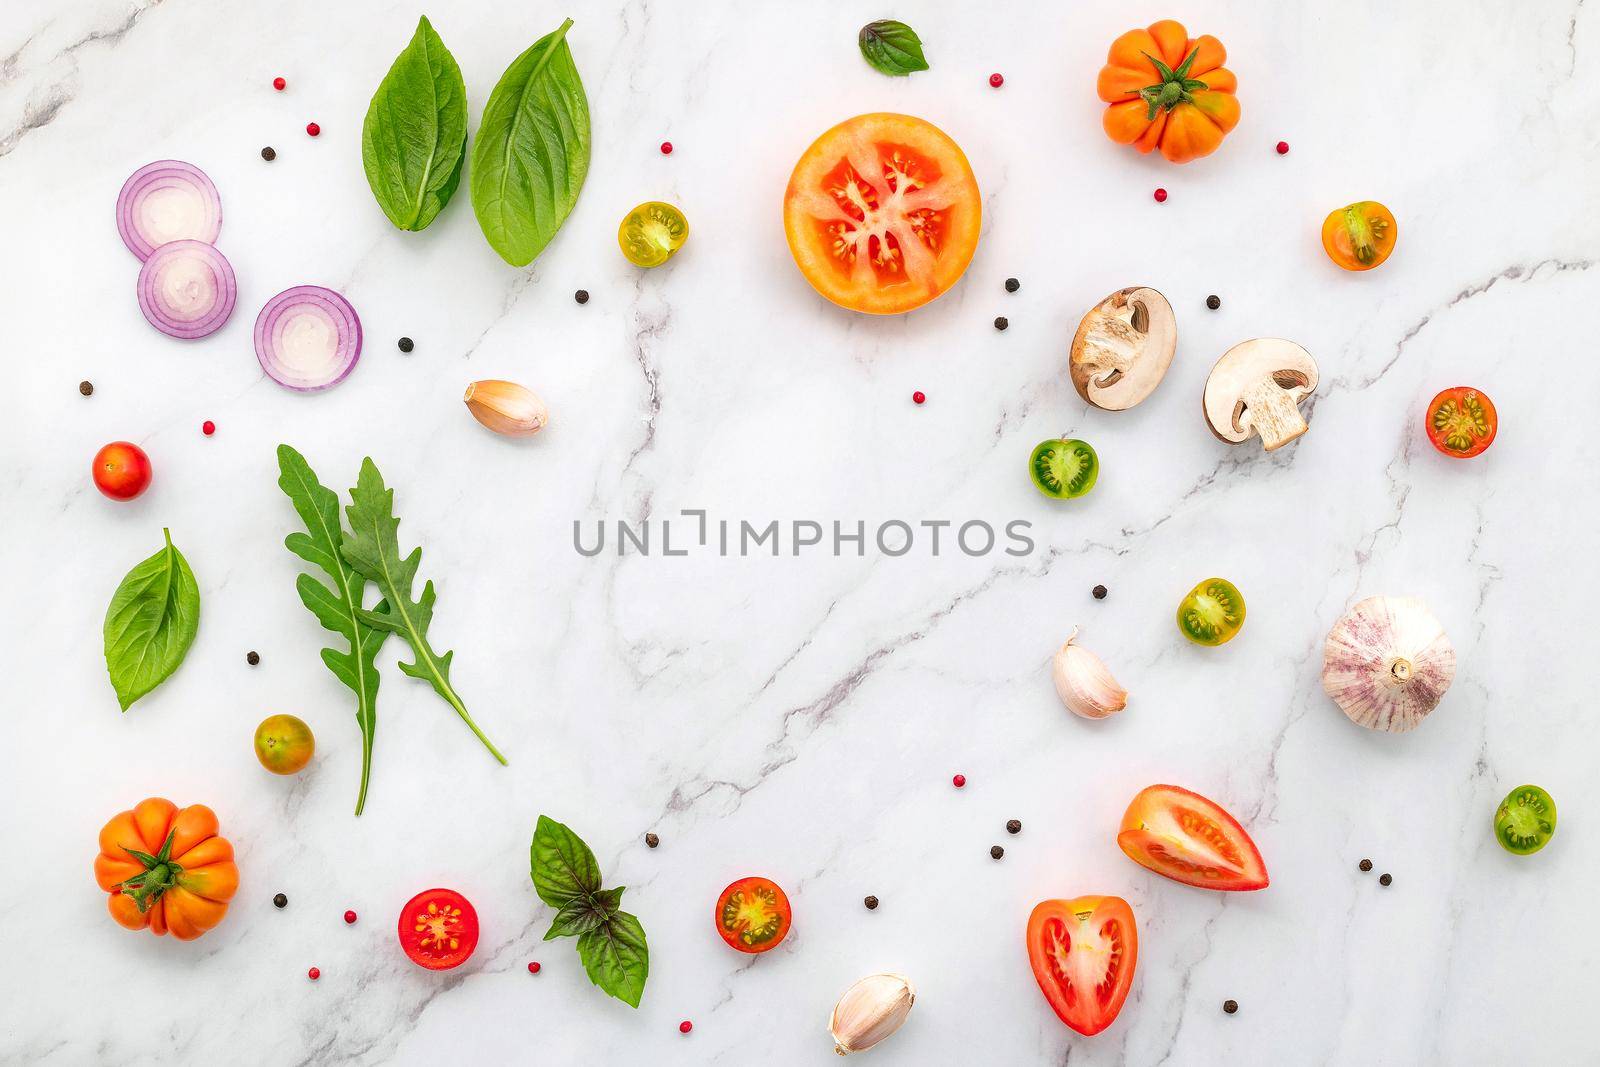 The ingredients for homemade pizza set up on white marble background. by kerdkanno